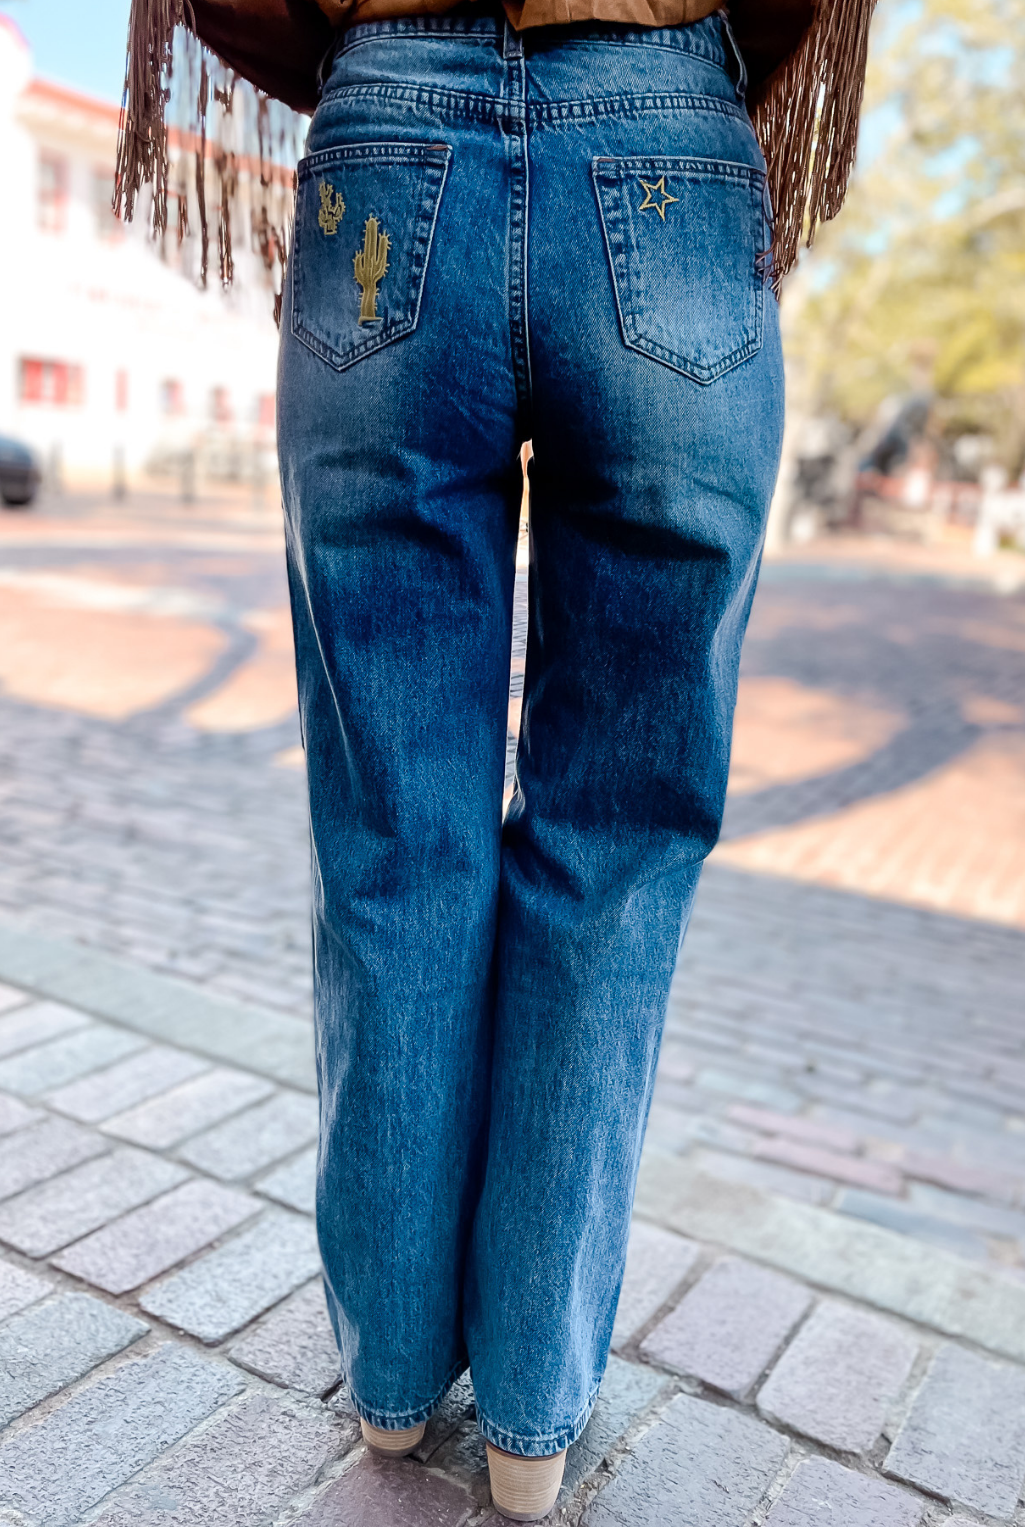 Western Motif Embroidered Jeans